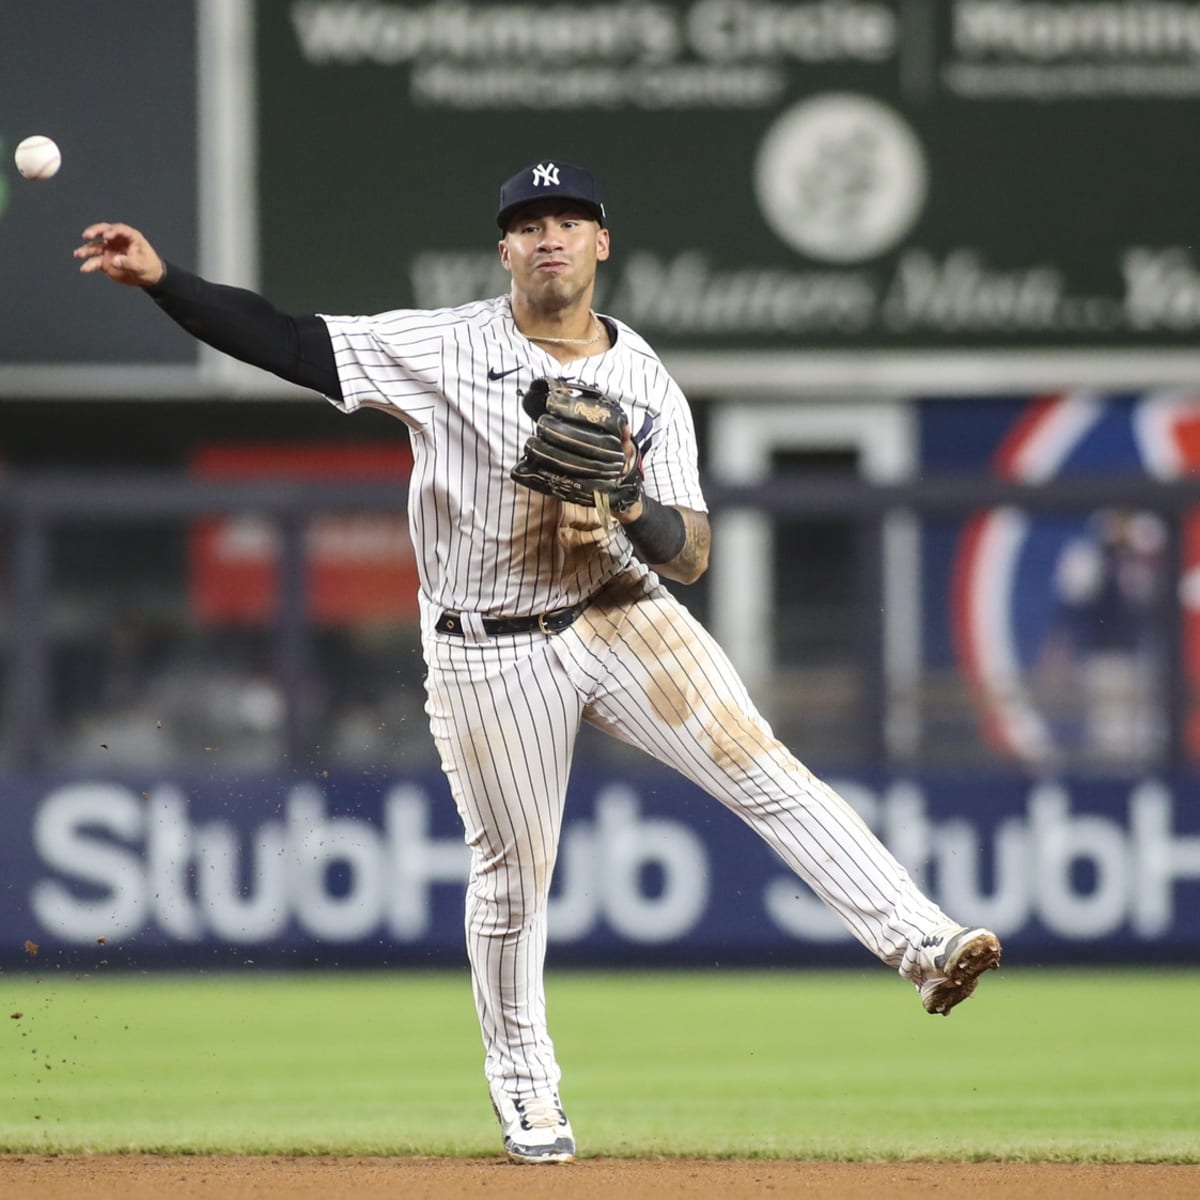 New York Yankees 2B Gleyber Torres Almost Ready to Return From